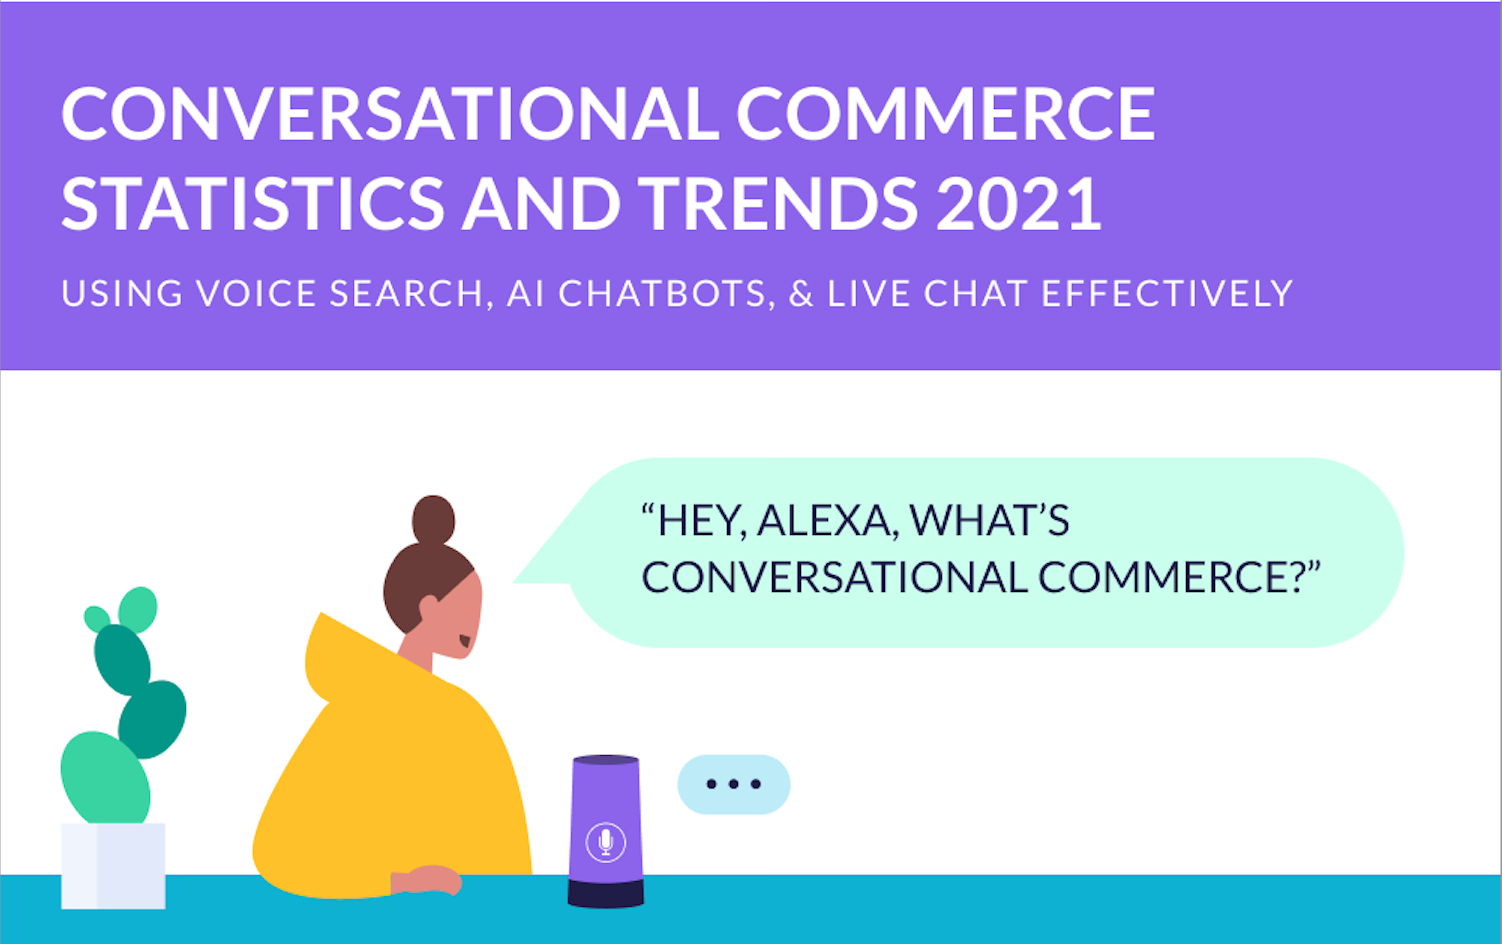 Using Conversational Commerce Technology to Satisfy Customers’ Needs